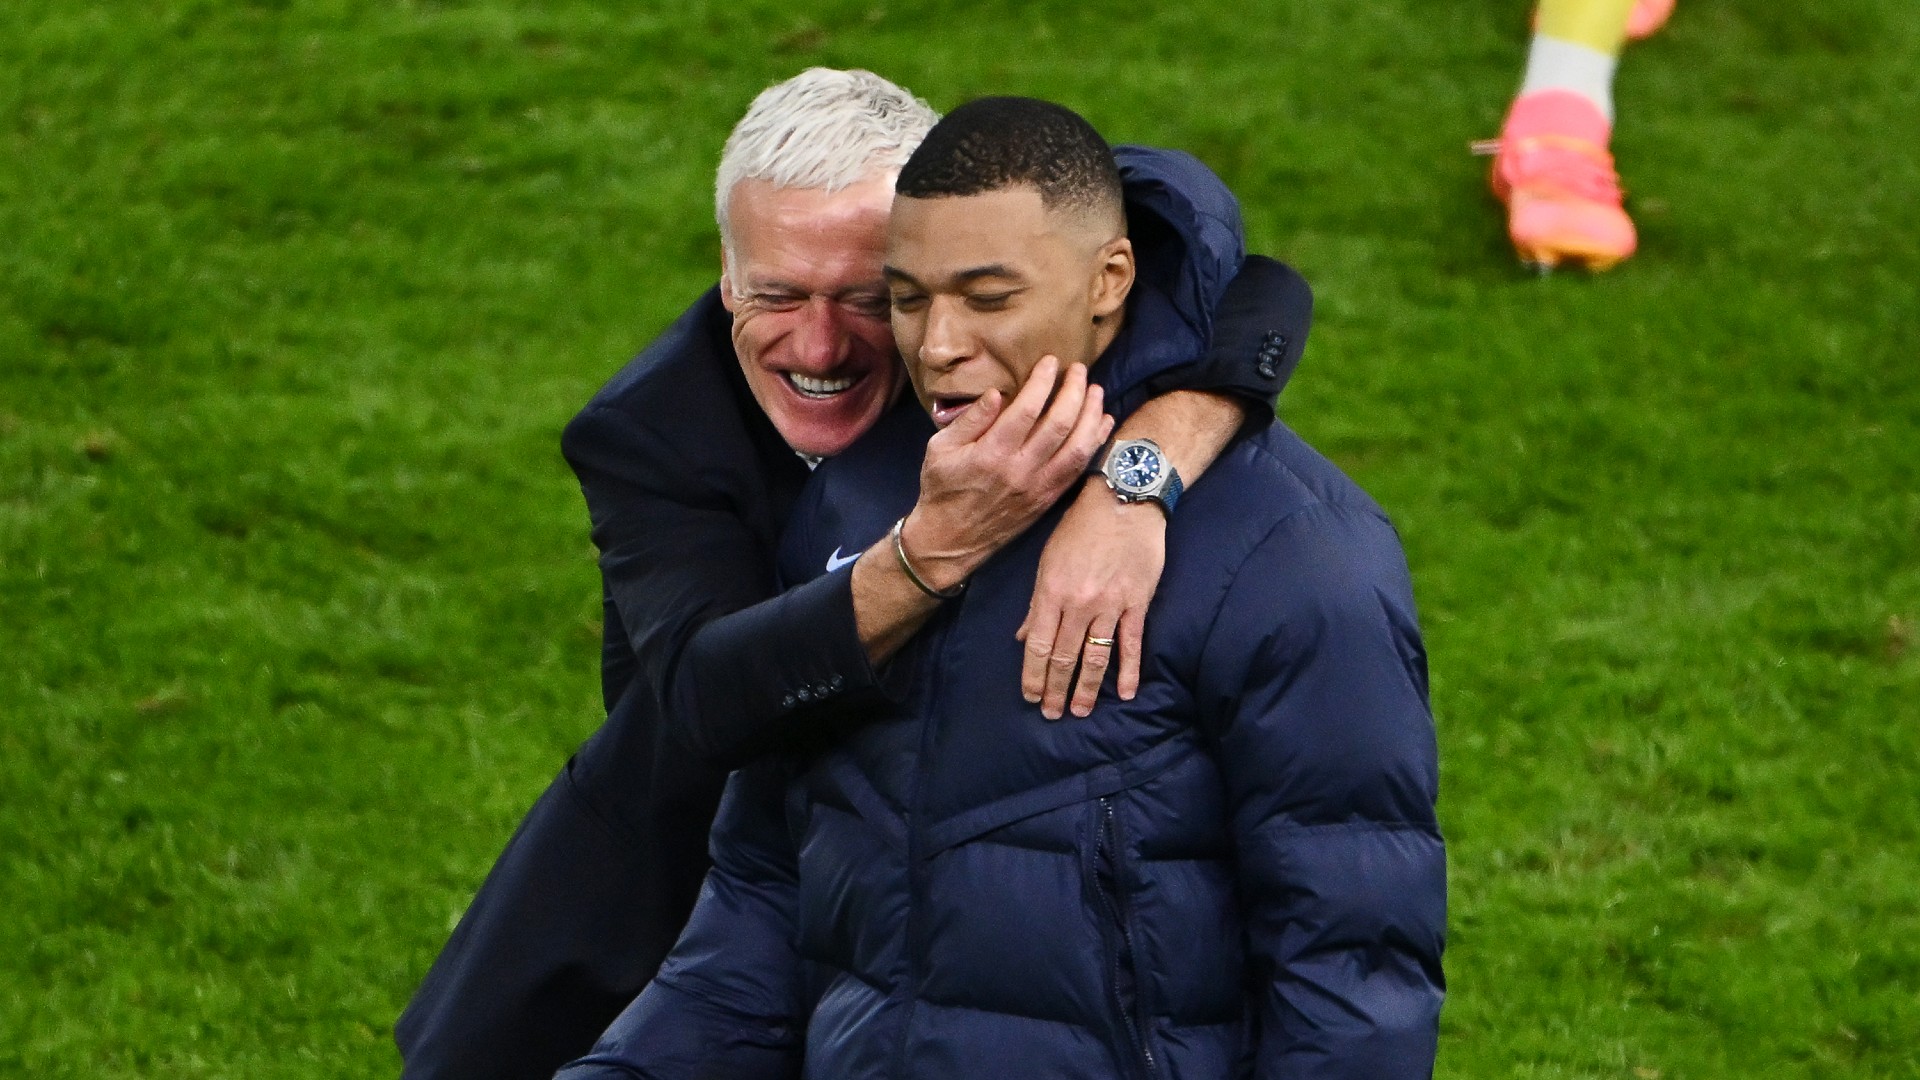 Mbappe was tired, says Deschamps